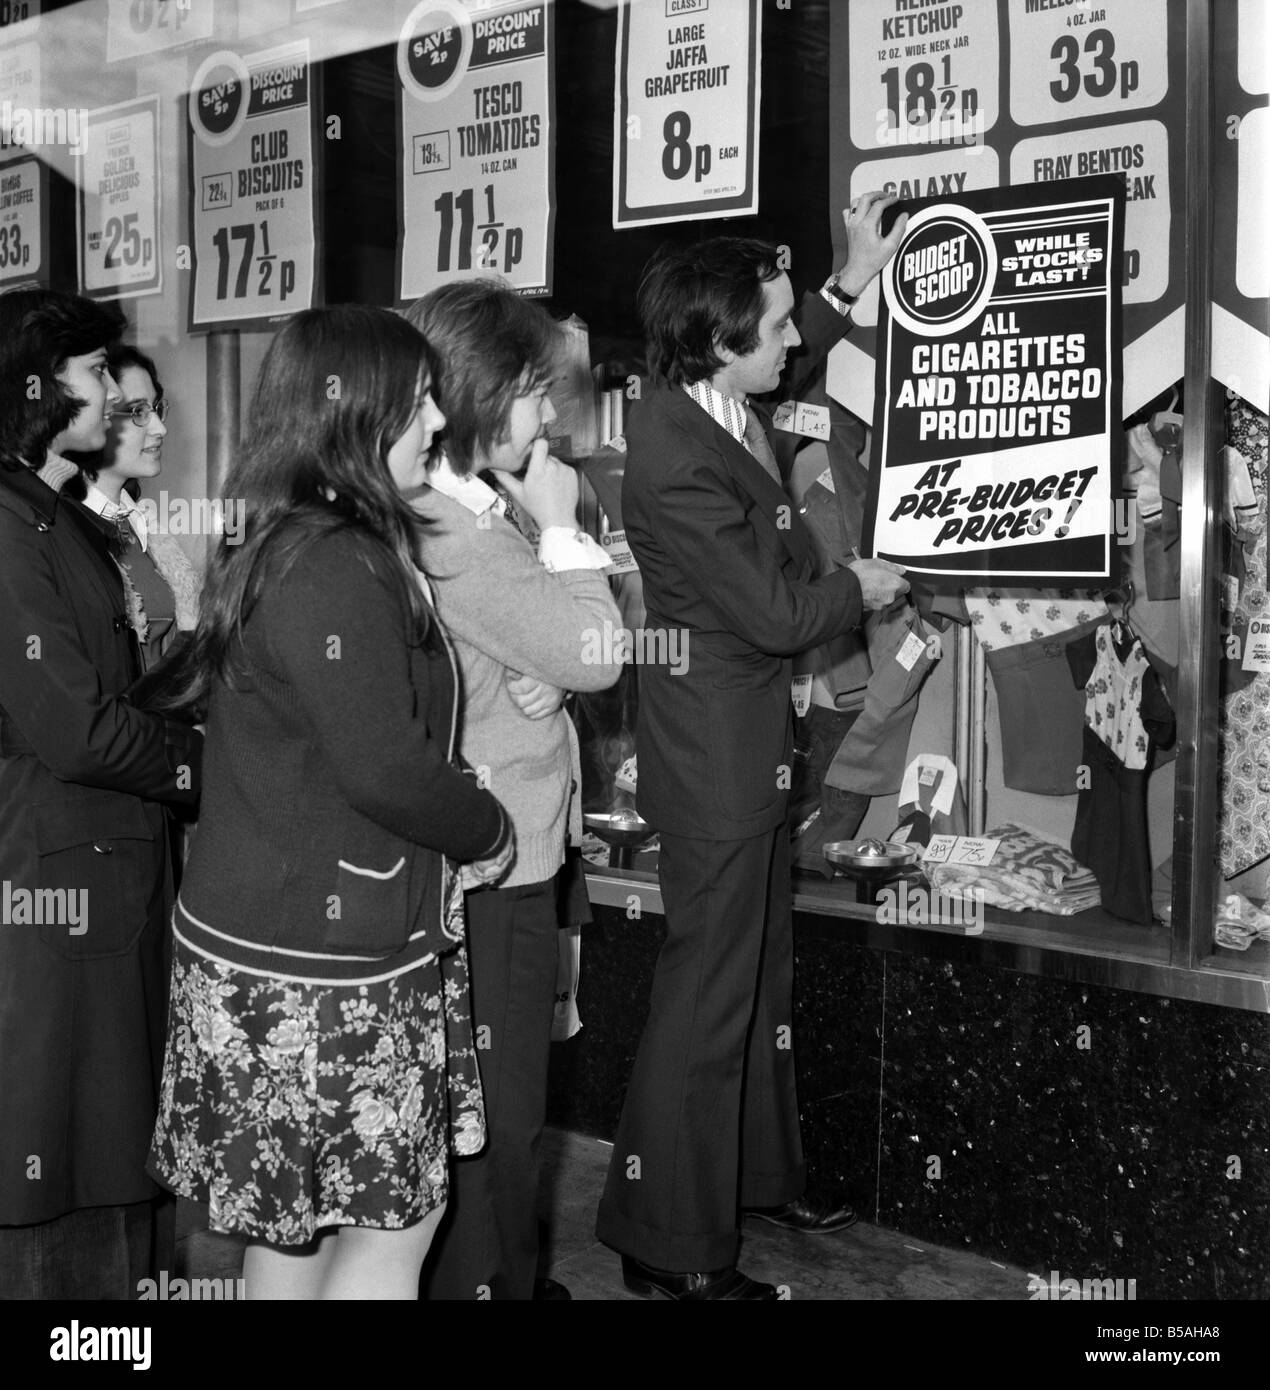 Tesco supervisor Tony Dobbin puts up 'pre-budget prices' posters on one of the company's stores in Camden High Street, London N.W.1. April 1975 Stock Photo